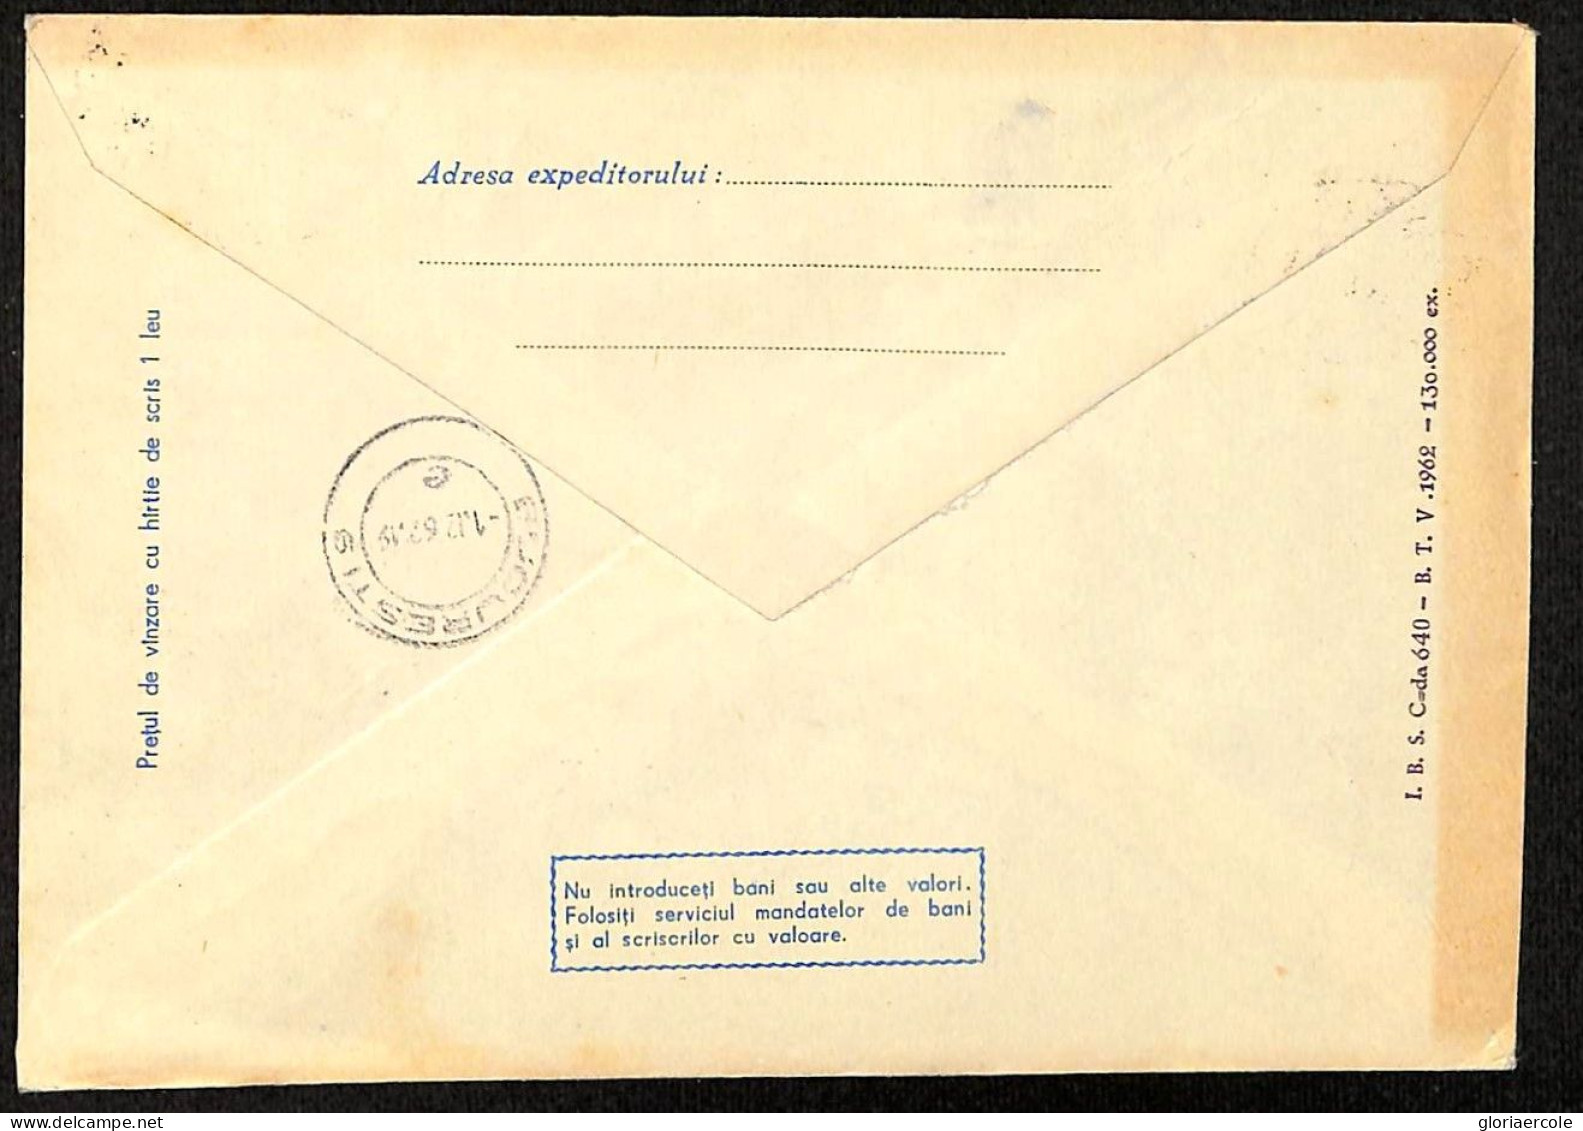 Af3775  - ROMANIA - POSTAL HISTORY - Postal Stationery Cover - ROWING Canoes - Canoa